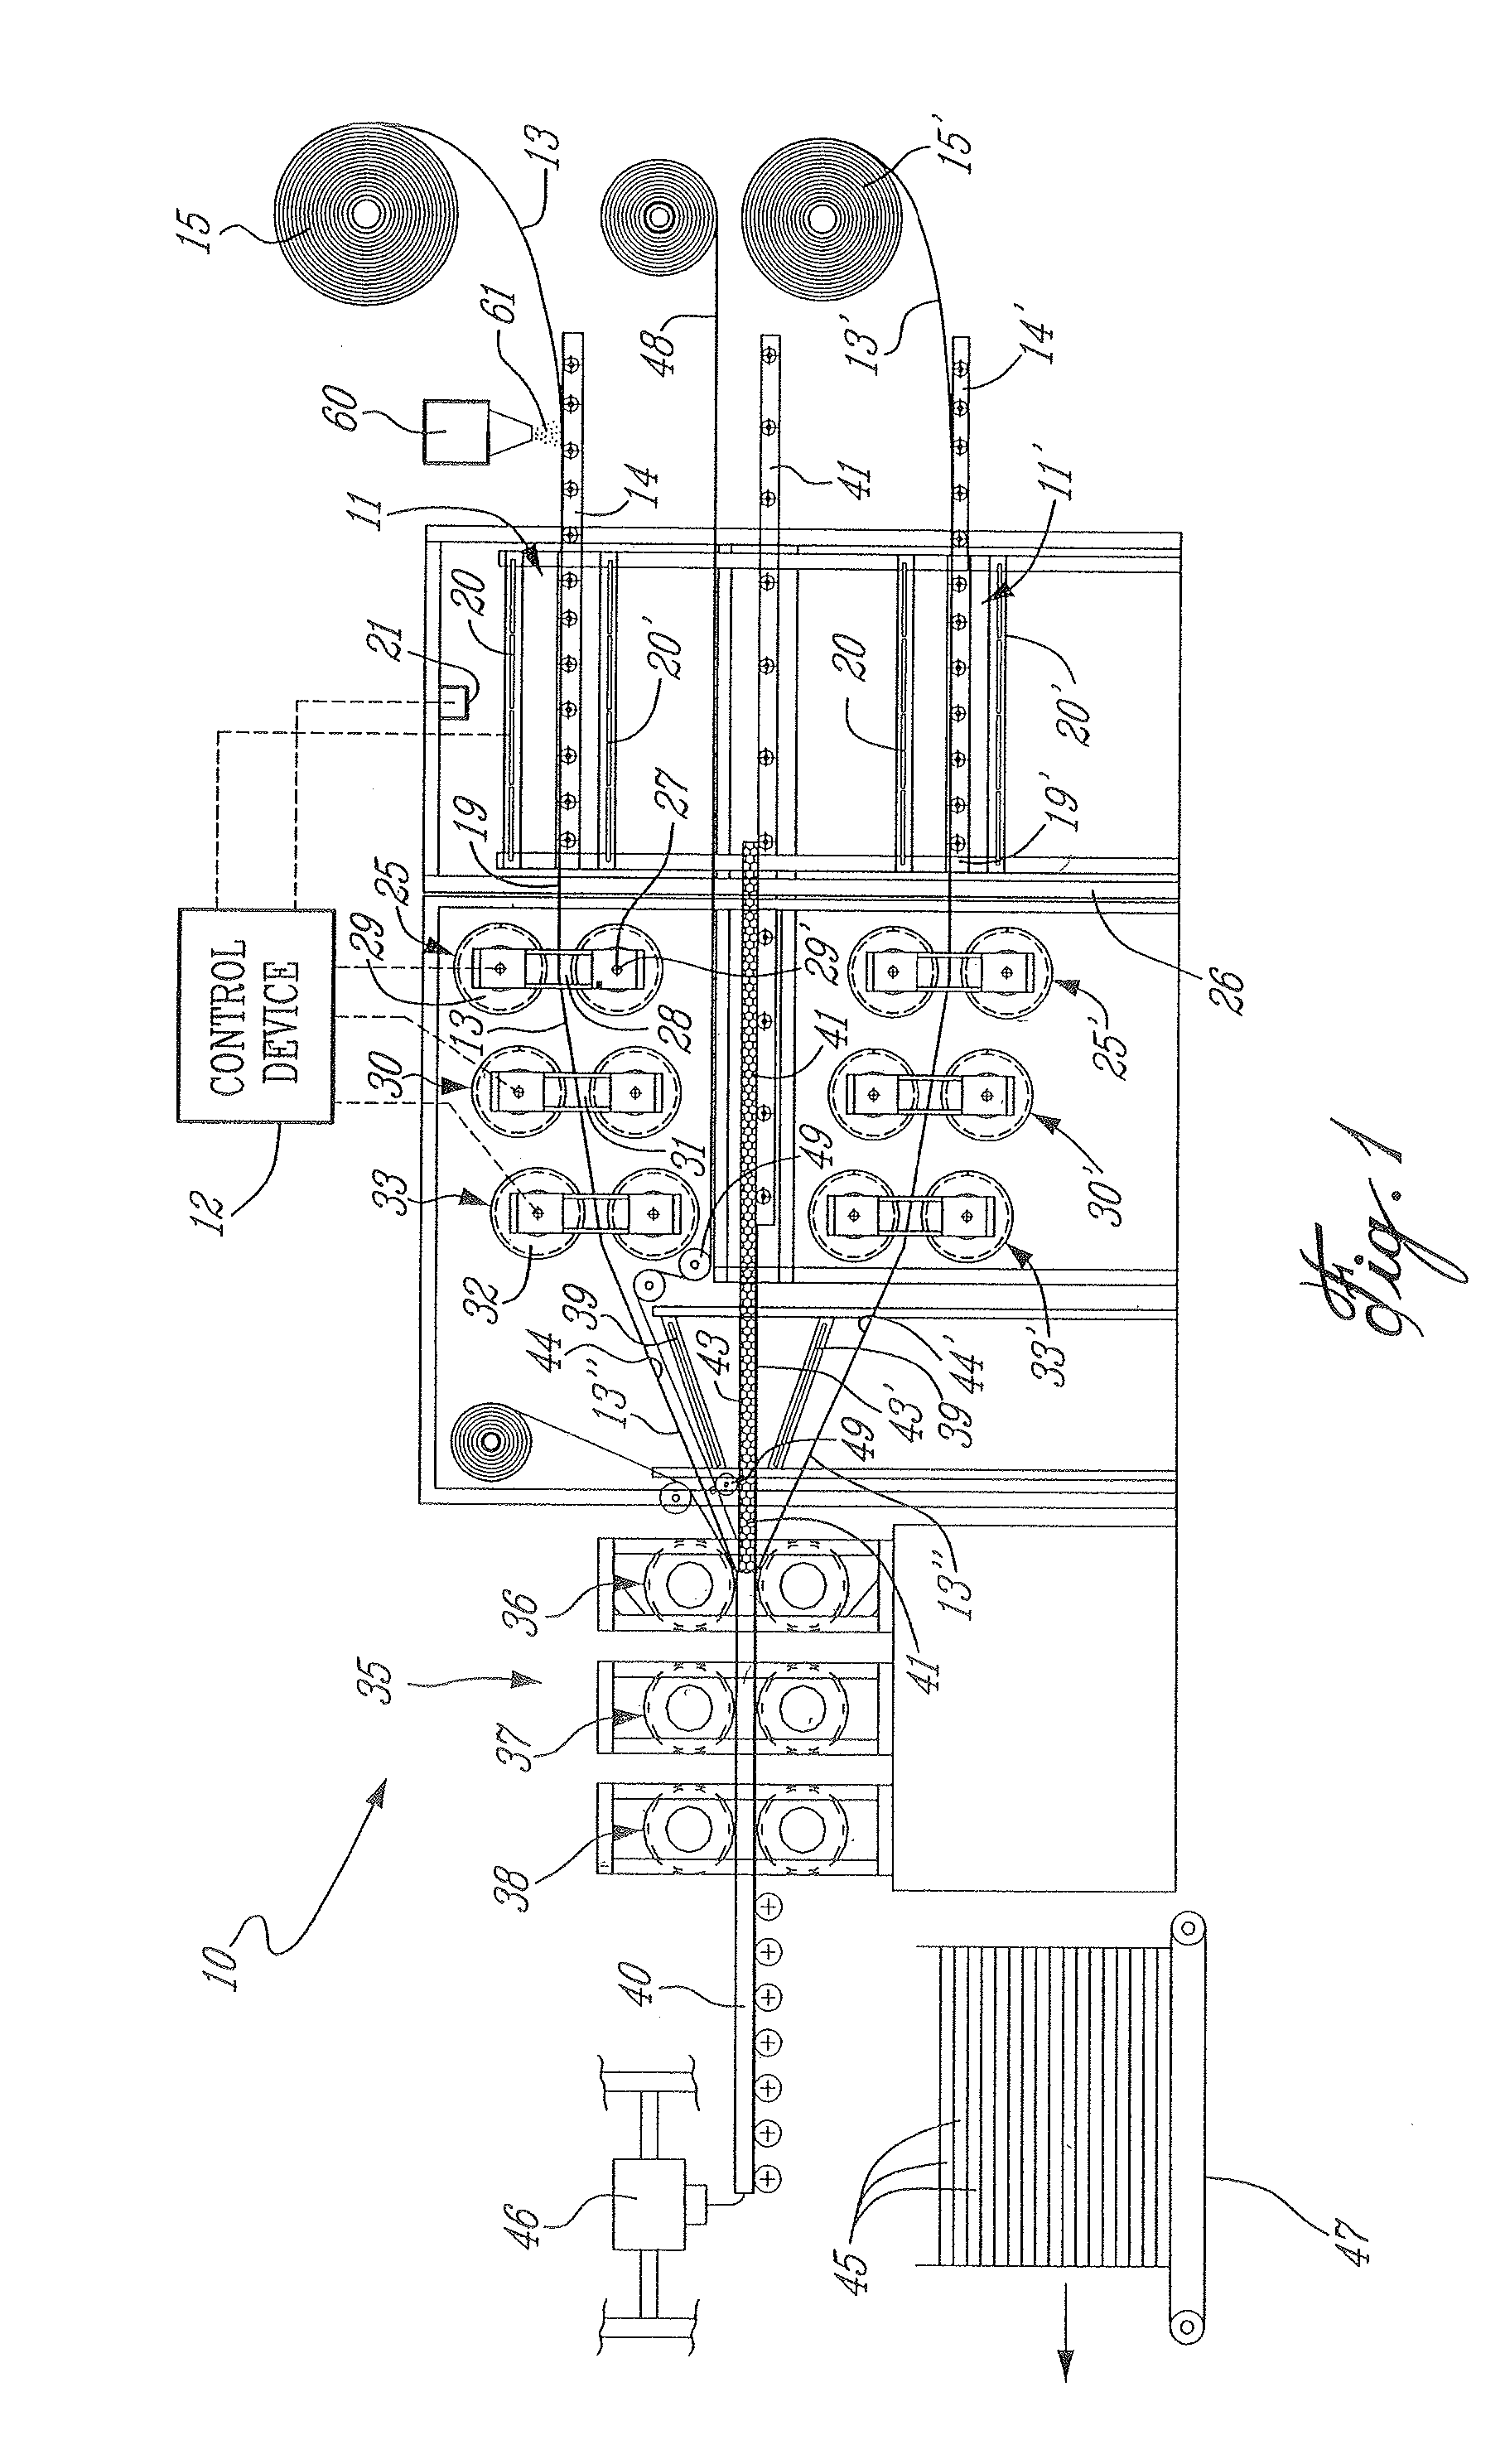 Process for producing lightweight thermoplastic composite products in a continuous manner